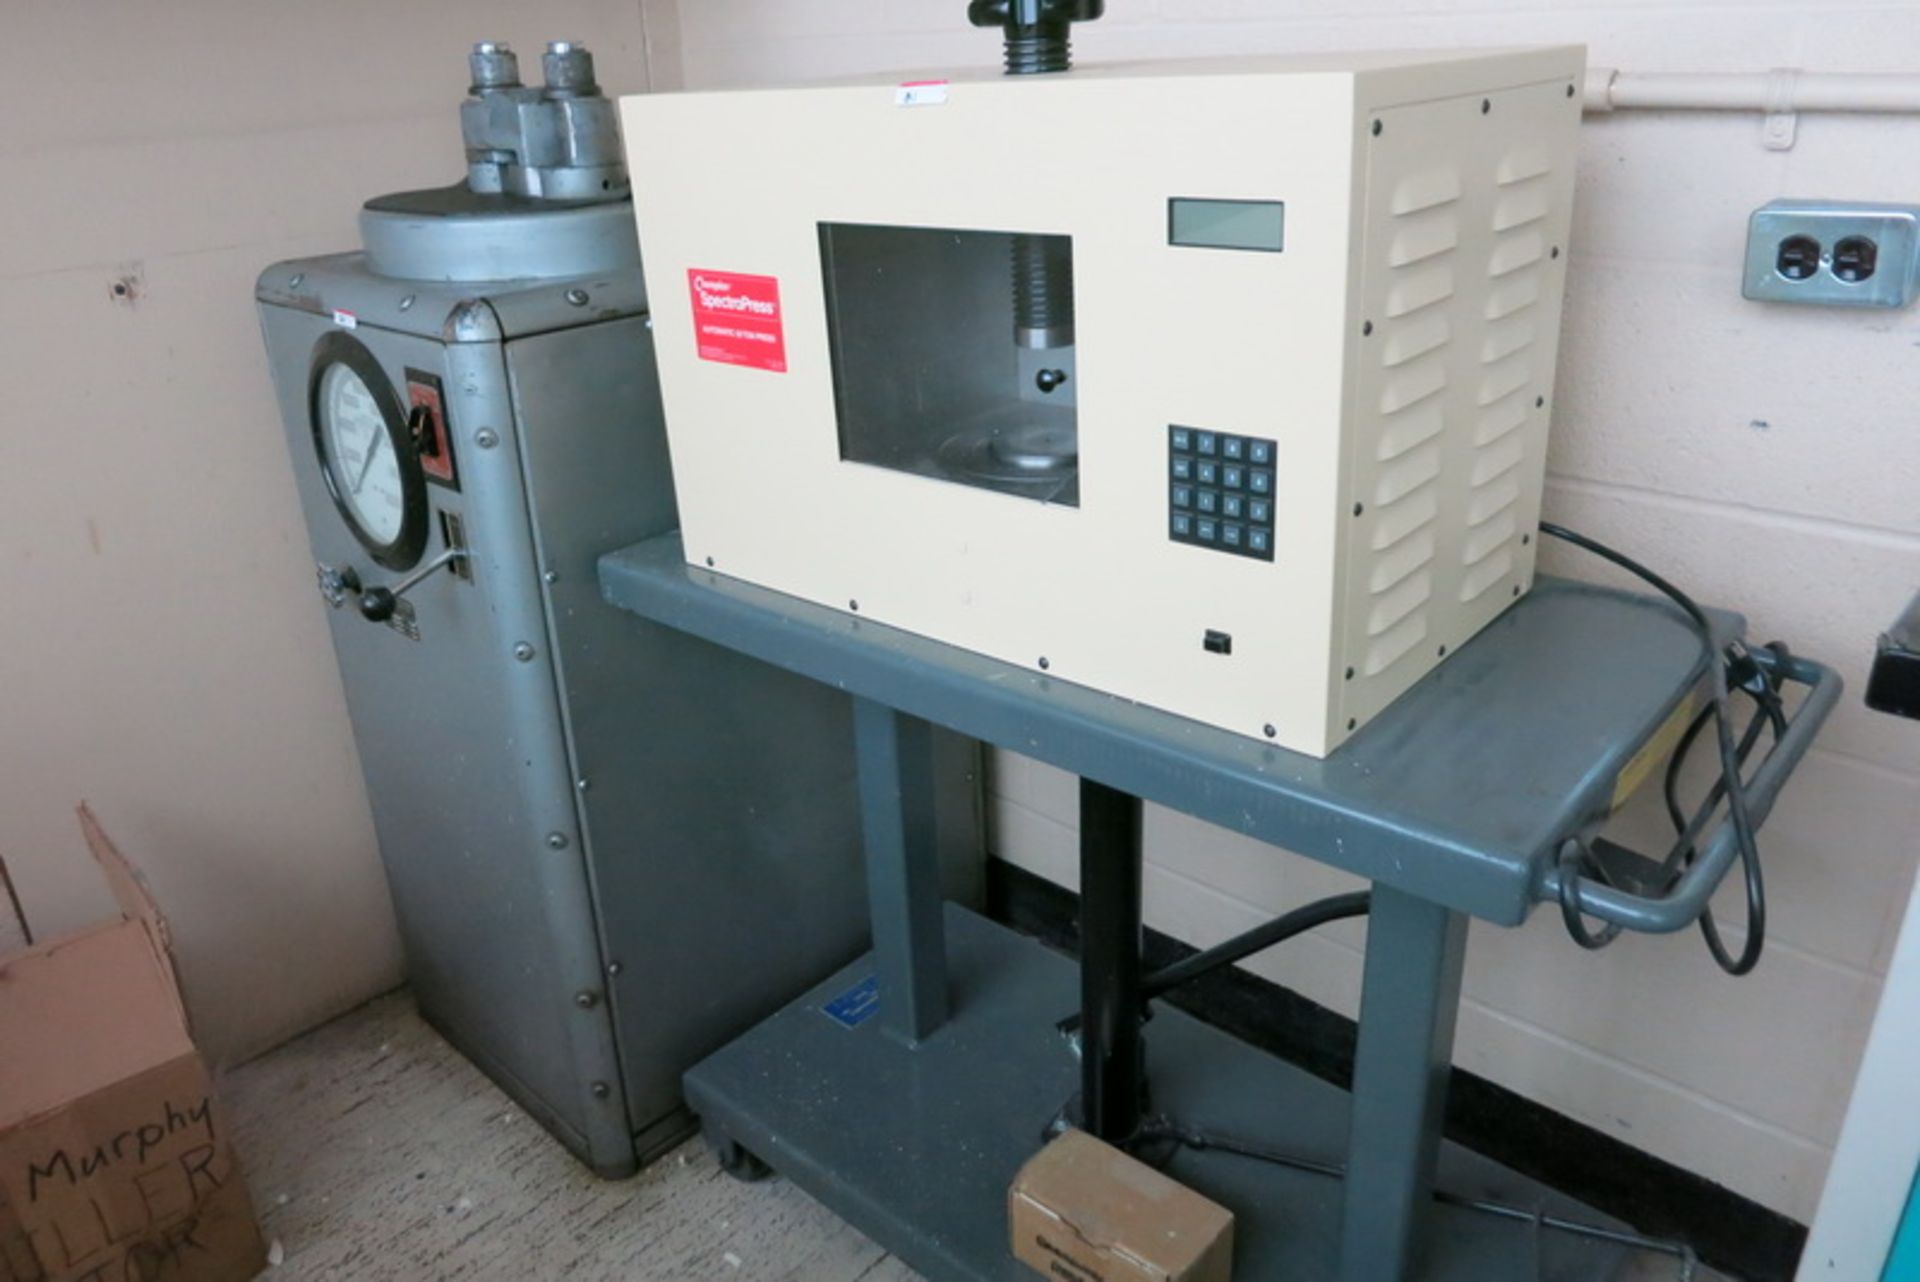 Chemplex spectropress, model 4350, s/n 01206011, mounted on mobile hydraulic table